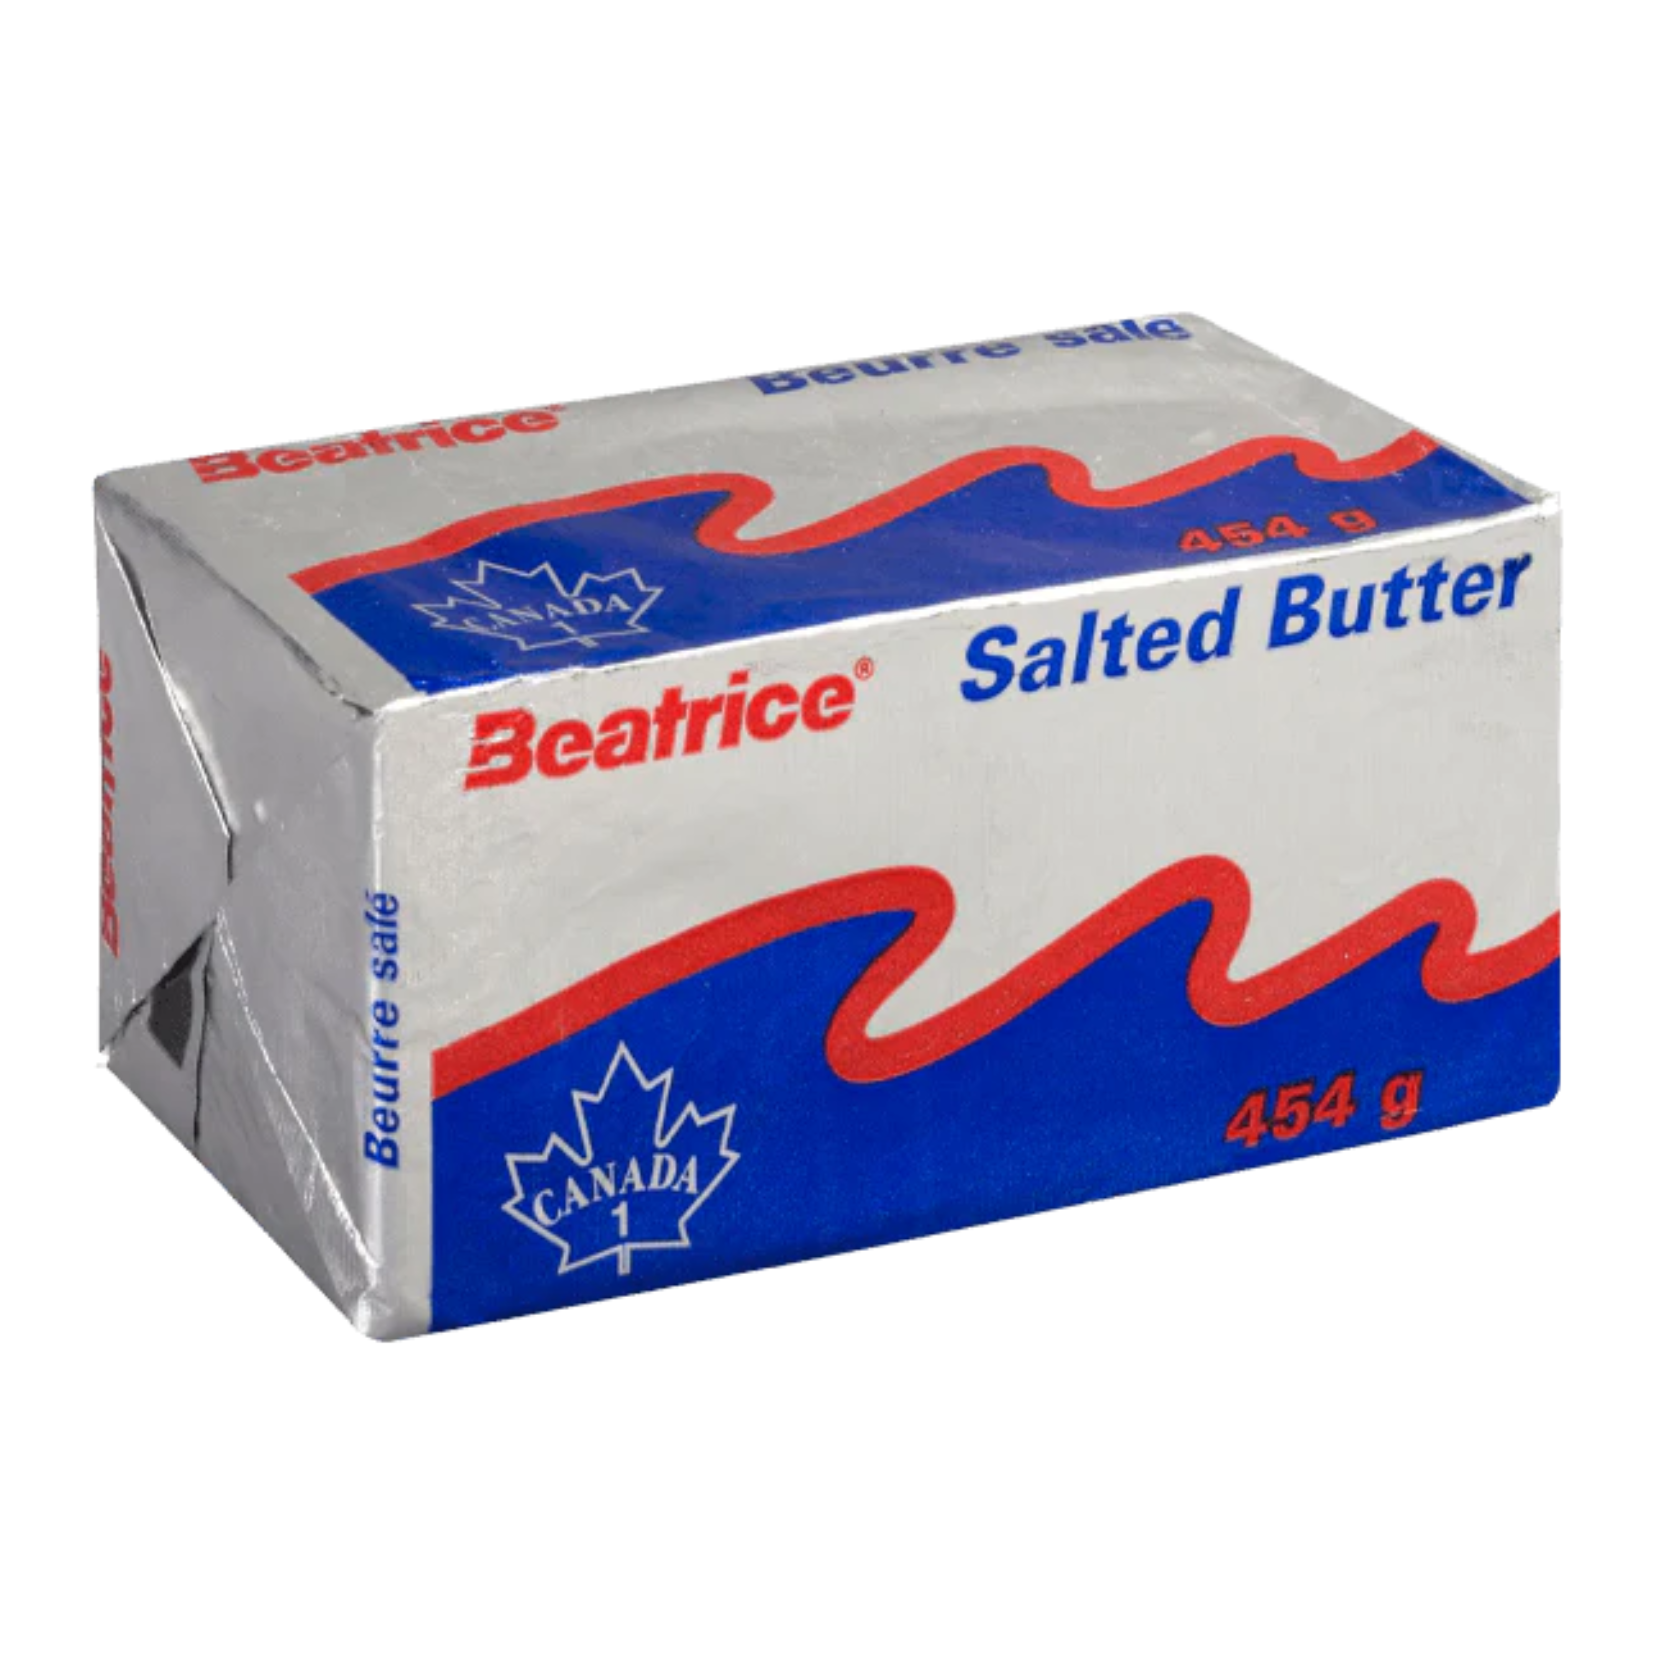 Beatrice Salted Butter 454g